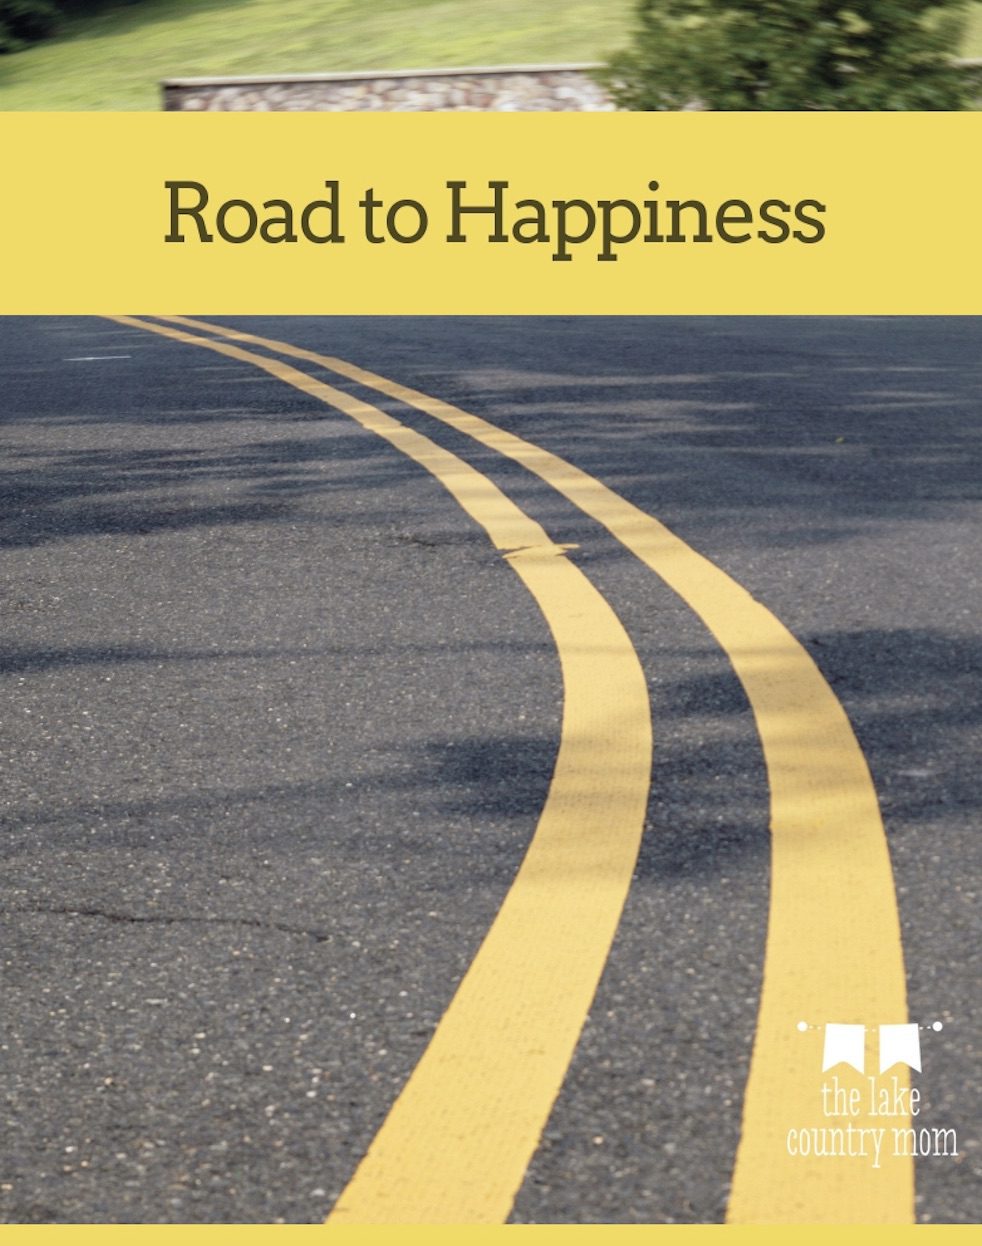 Road to Happiness. My story.